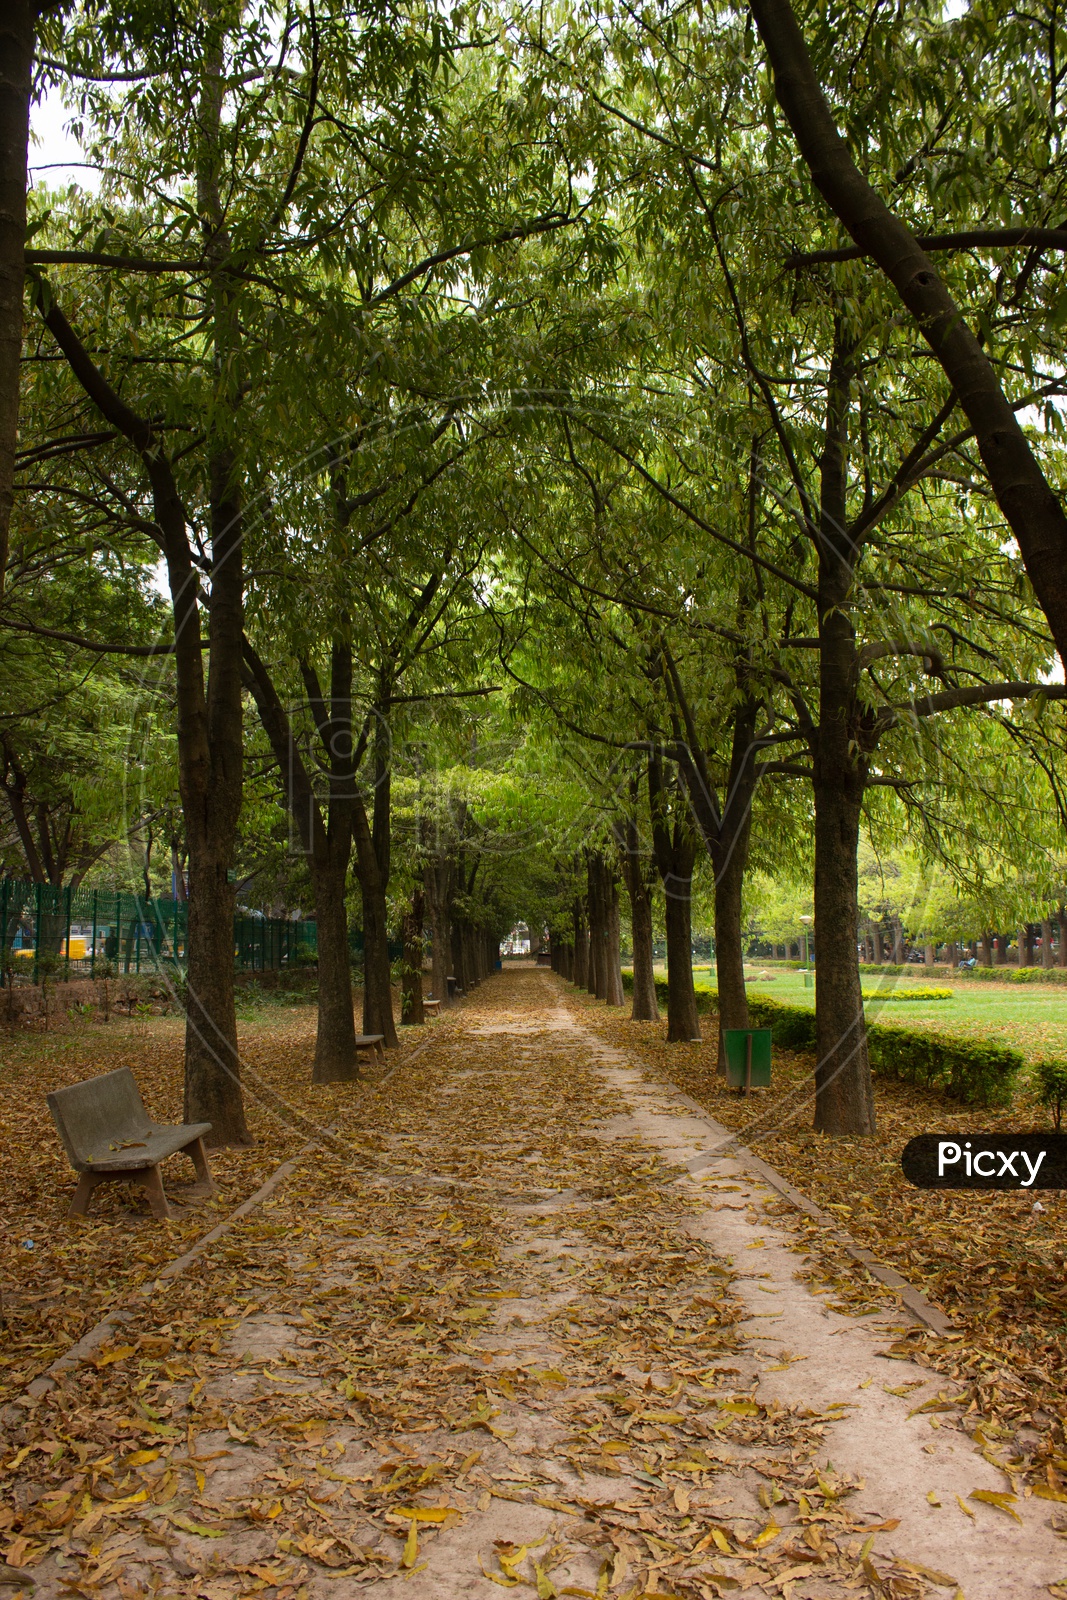 Pathways In Cubbon Park With Trees on Both Sides Of the lane